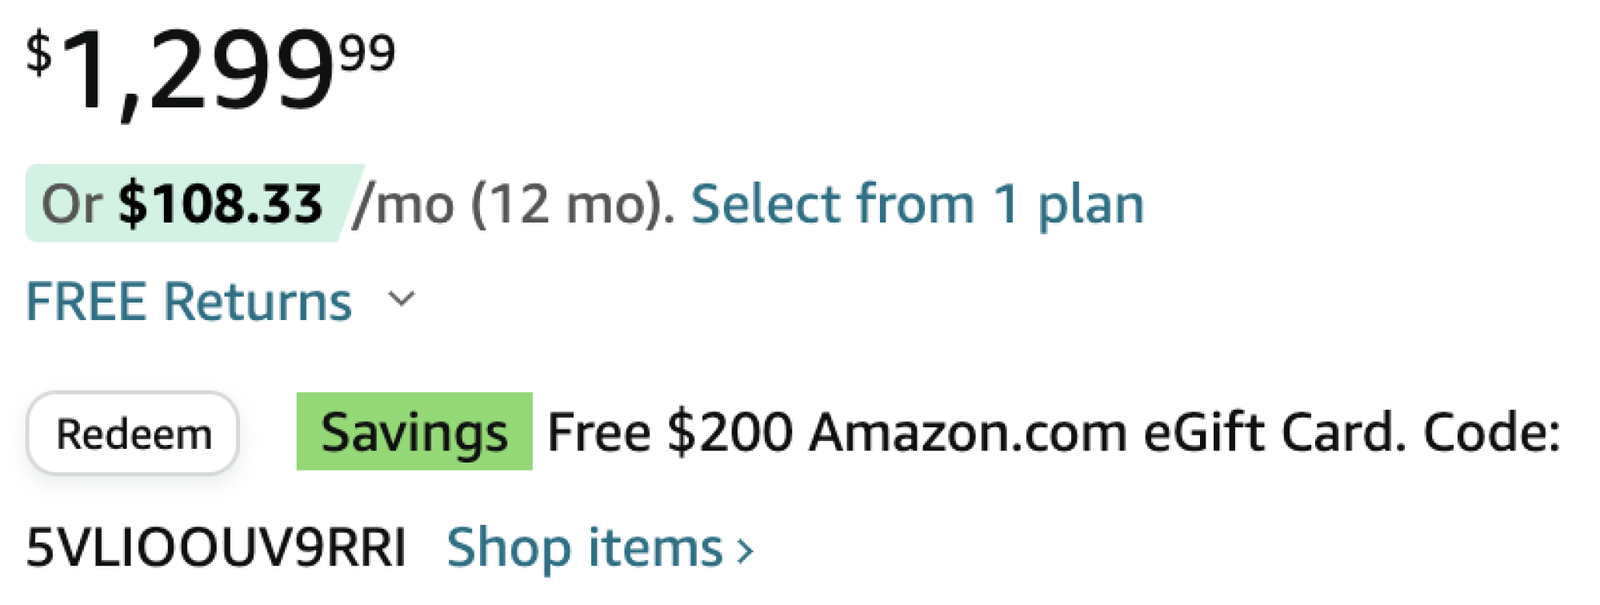 Click the redeem button below the price to get the Amazon gift card.